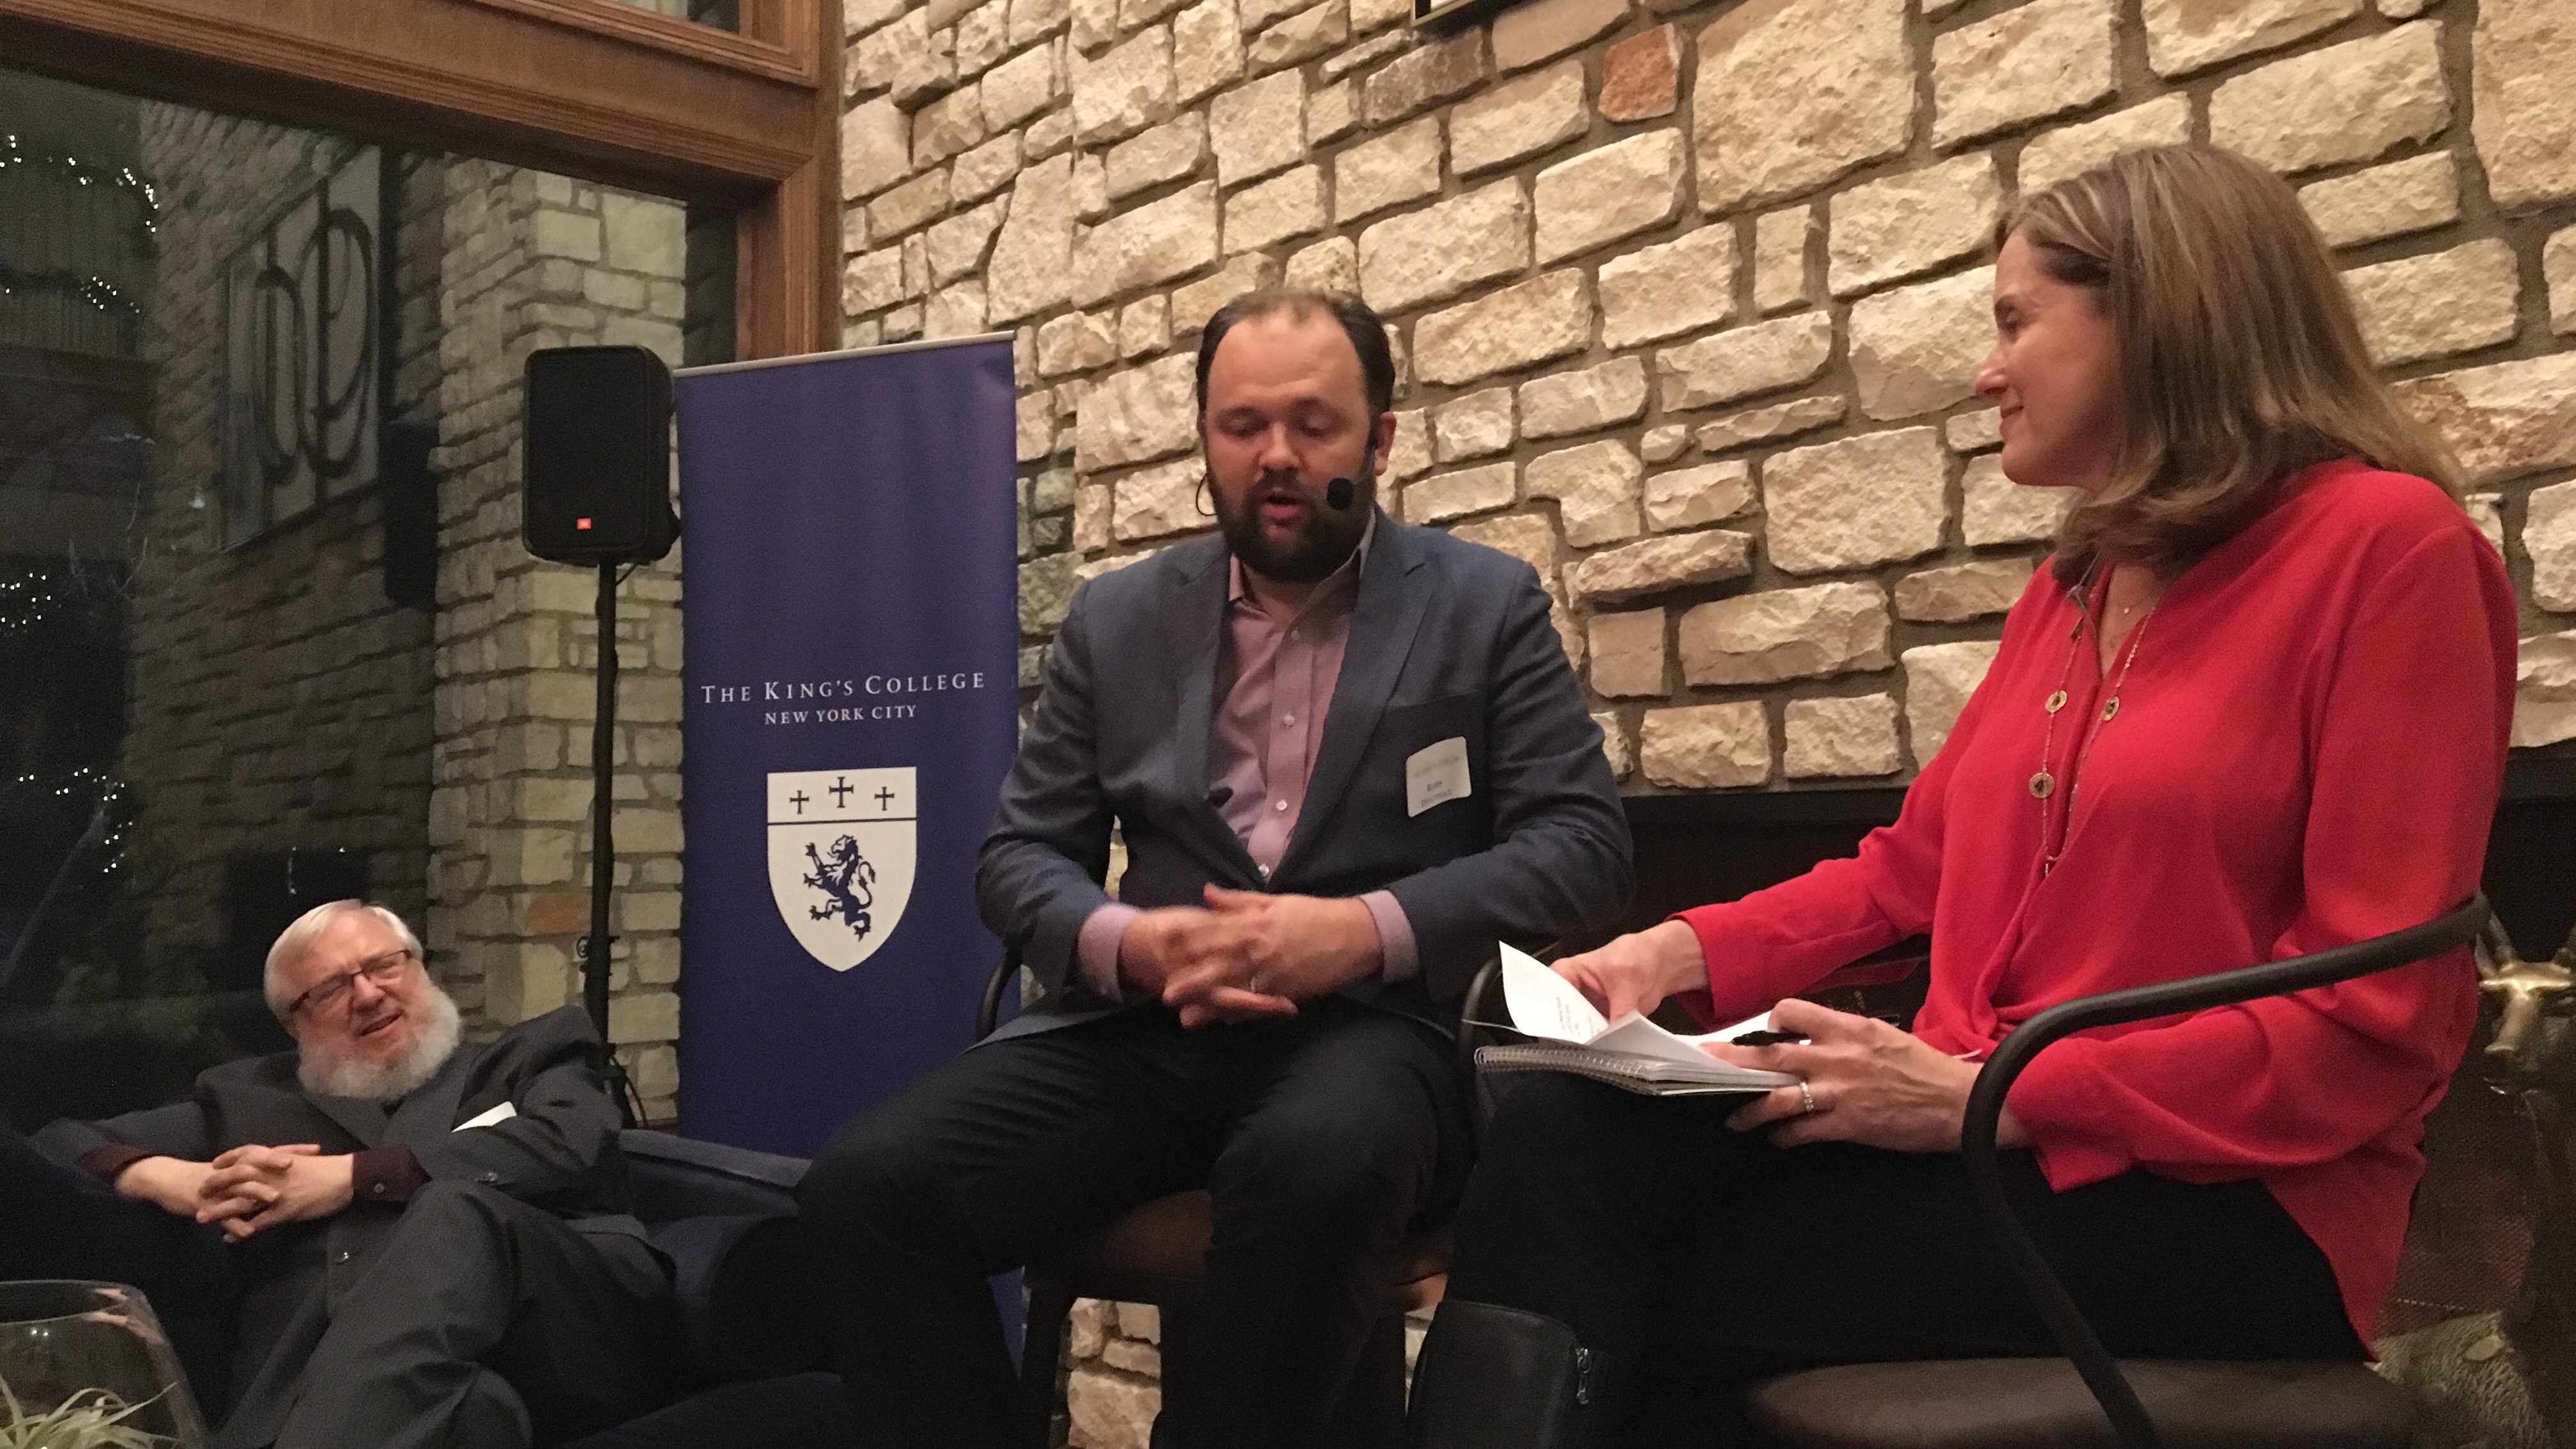 Ross Douthat and Peggy Wehmeyer